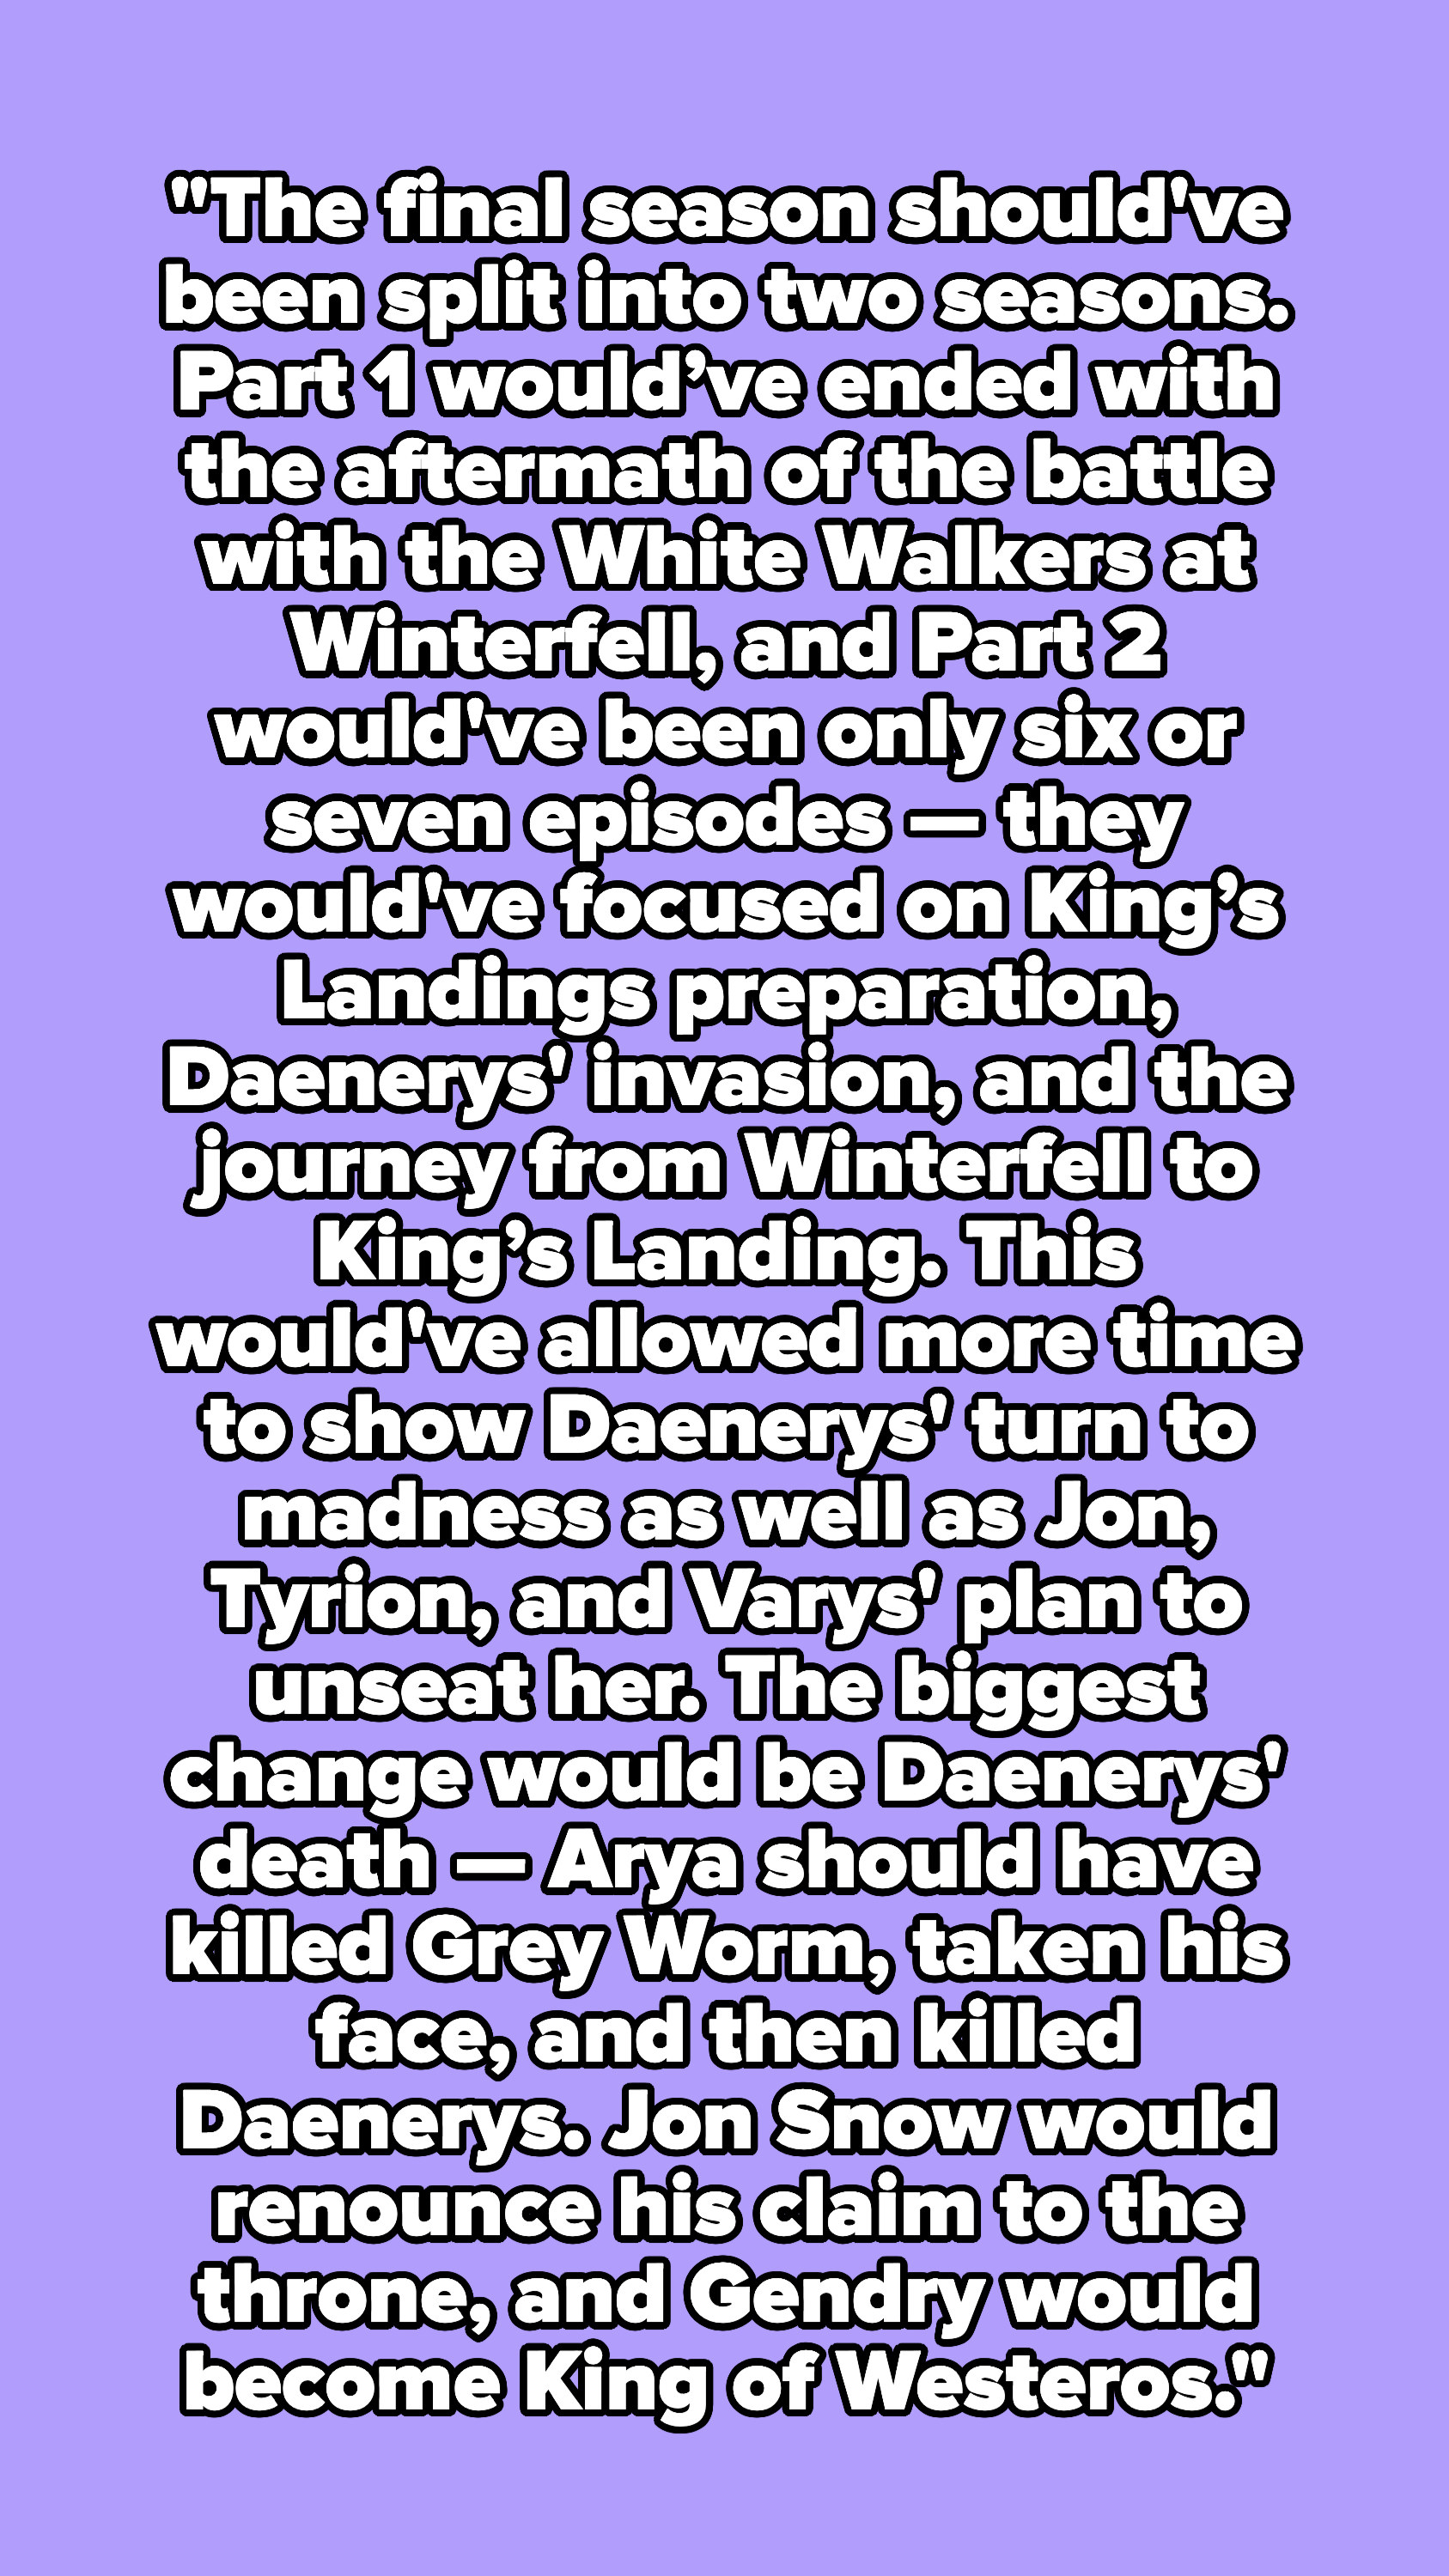 &quot;The final season should&#x27;ve been split into two seasons. Part 1 would’ve ended with the aftermath of the battle with the White Walkers at Winterfell and Part 2 would&#x27;ve been only 6 or 7 episodes.&quot;